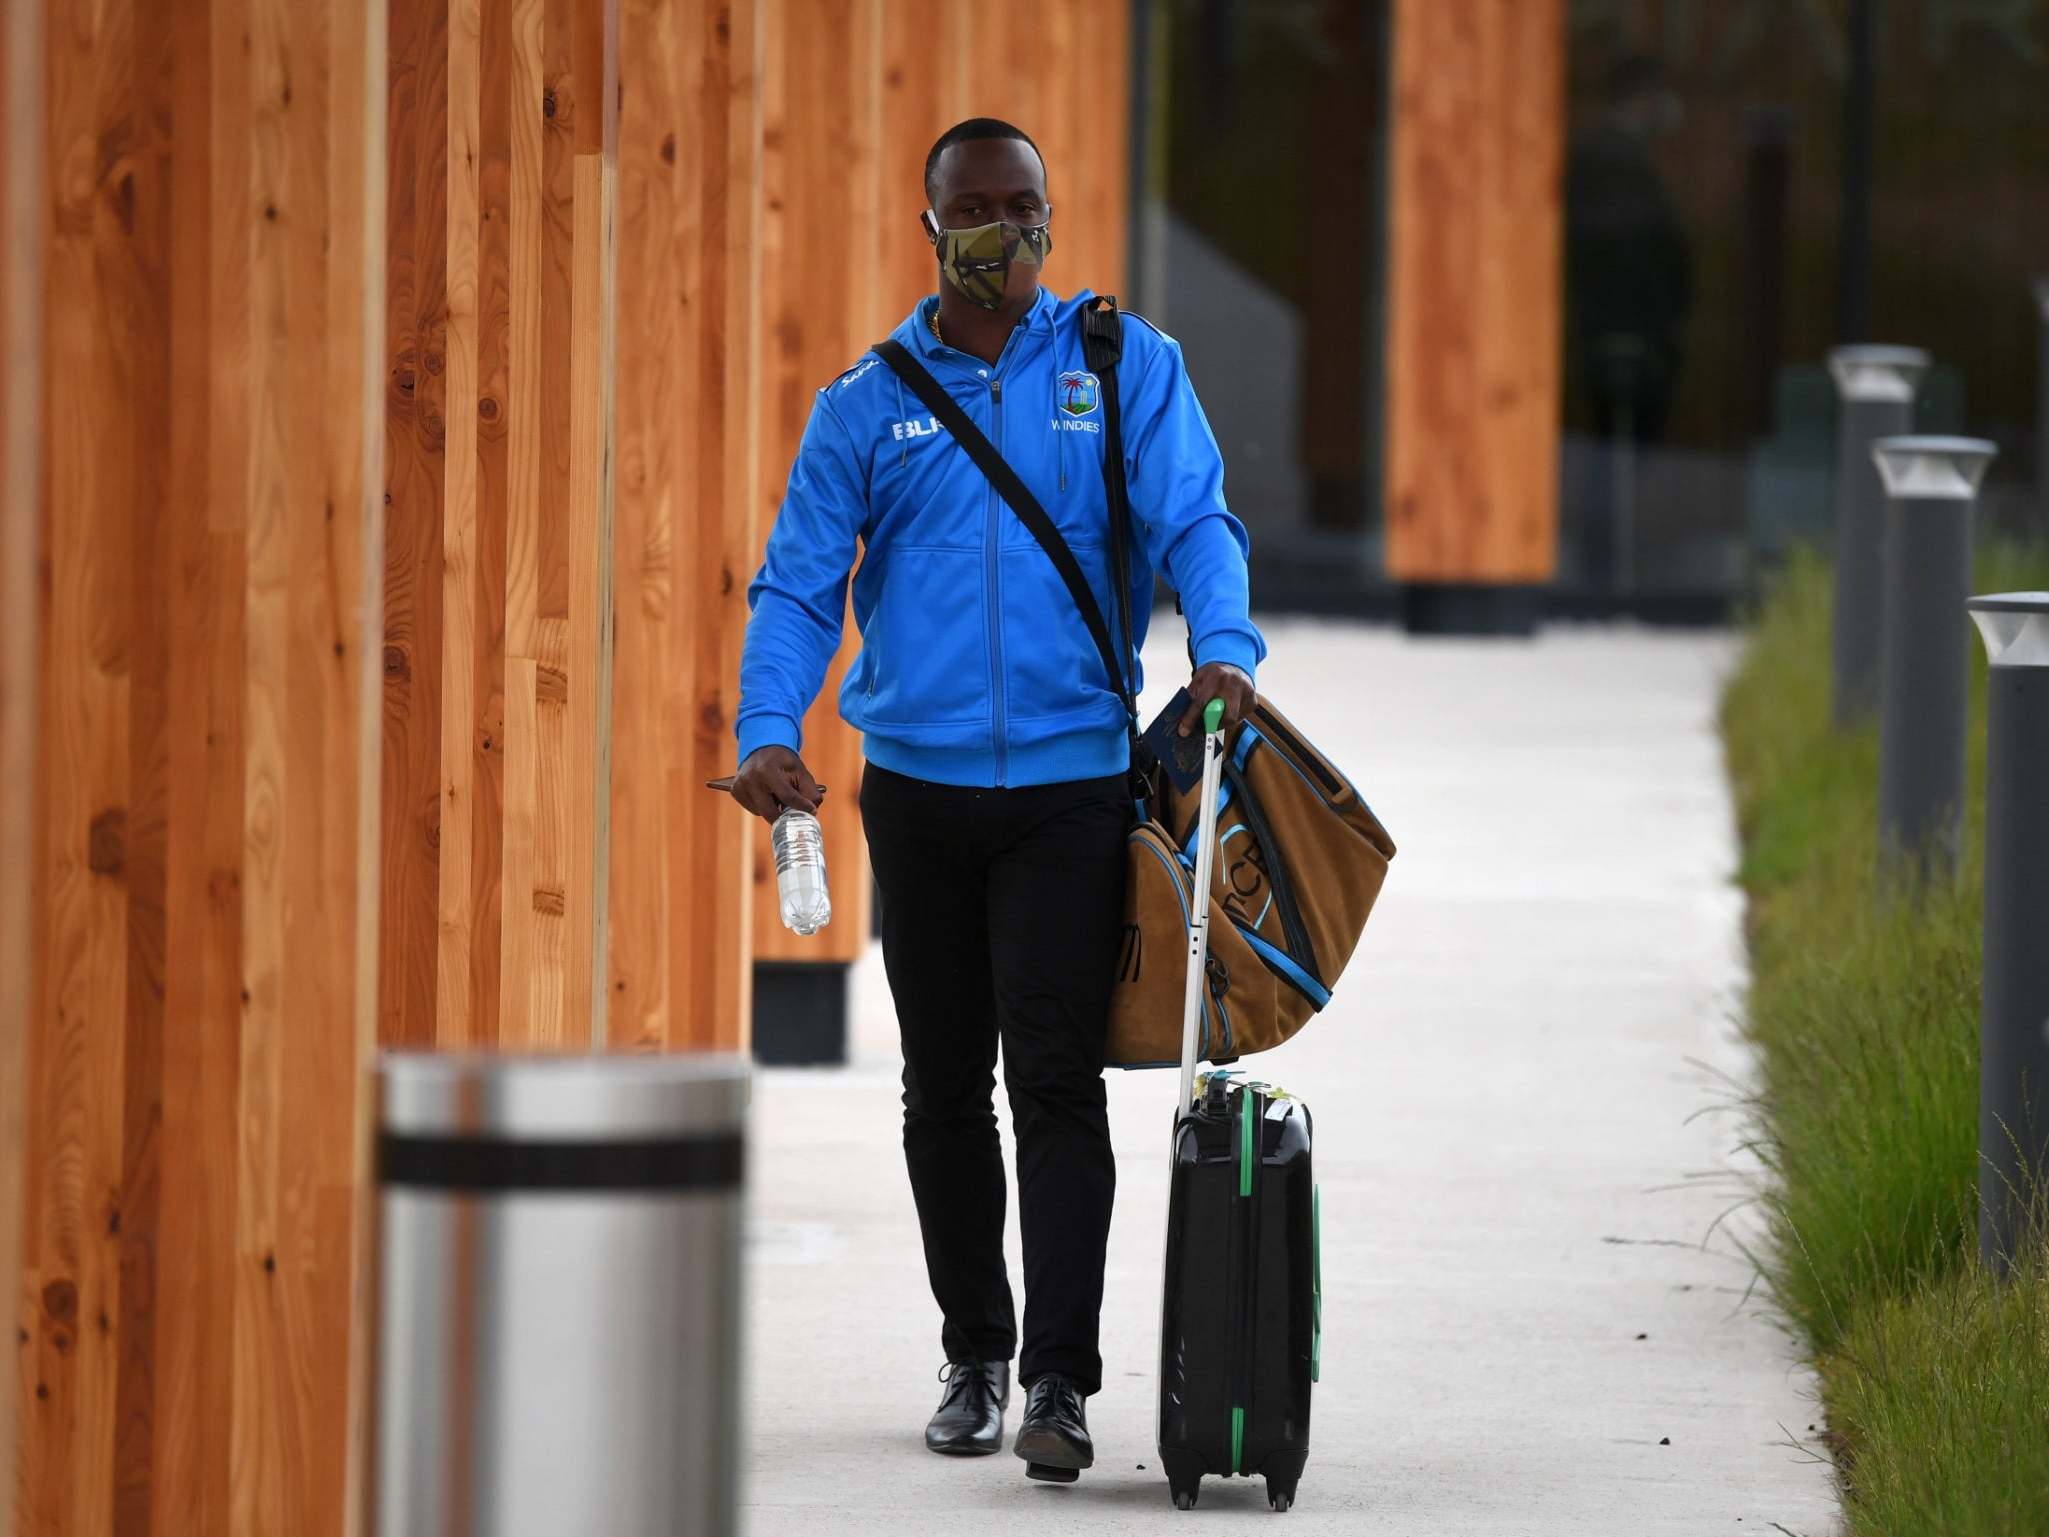 Kemar Roach arrives at the West Indies’s quarantine base at Old Trafford